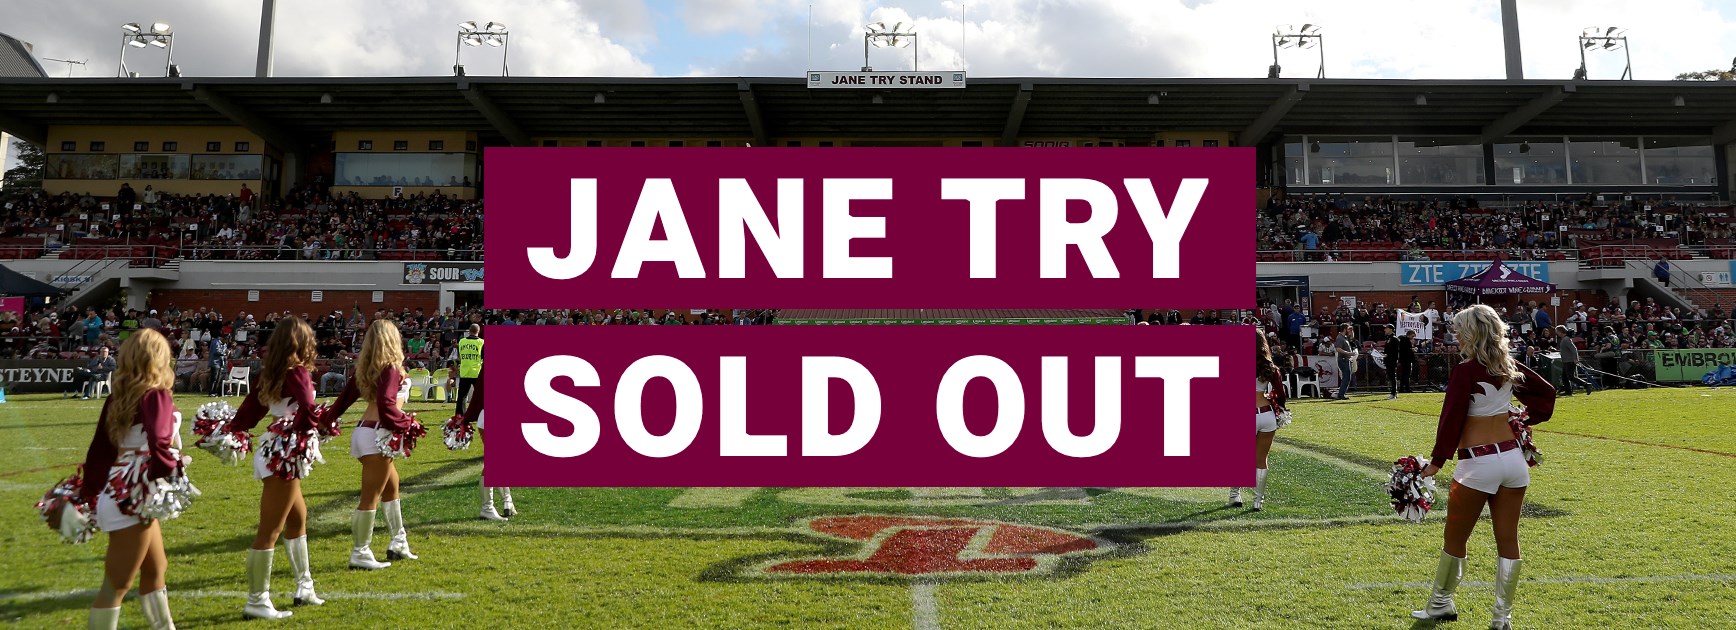 Jane Try Stand sold out to Sea Eagles Members